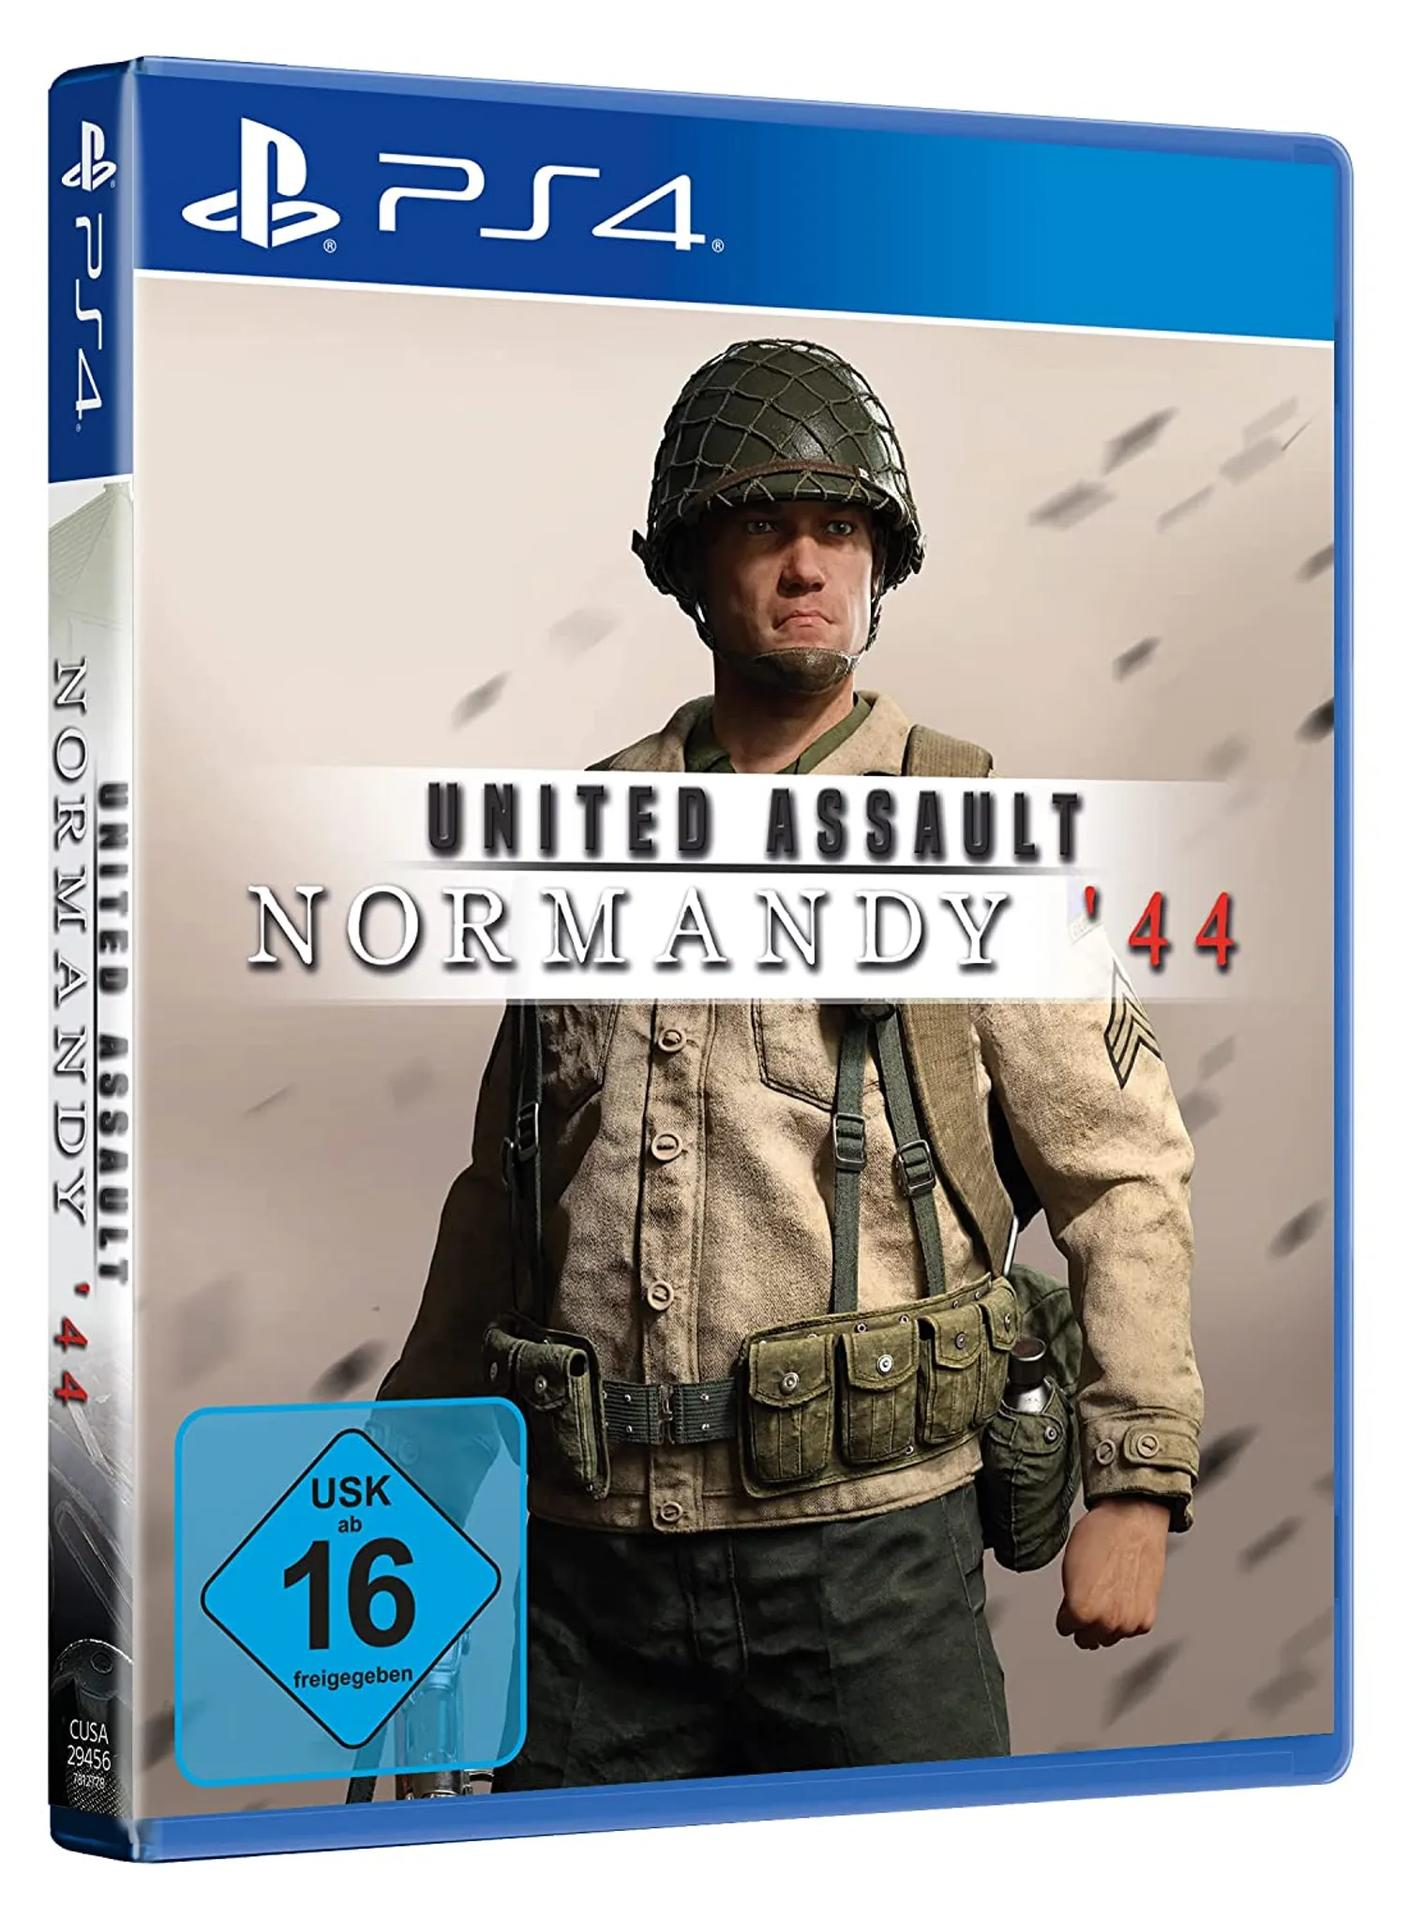 United Assault: Normandy [PlayStation \'44 4] 